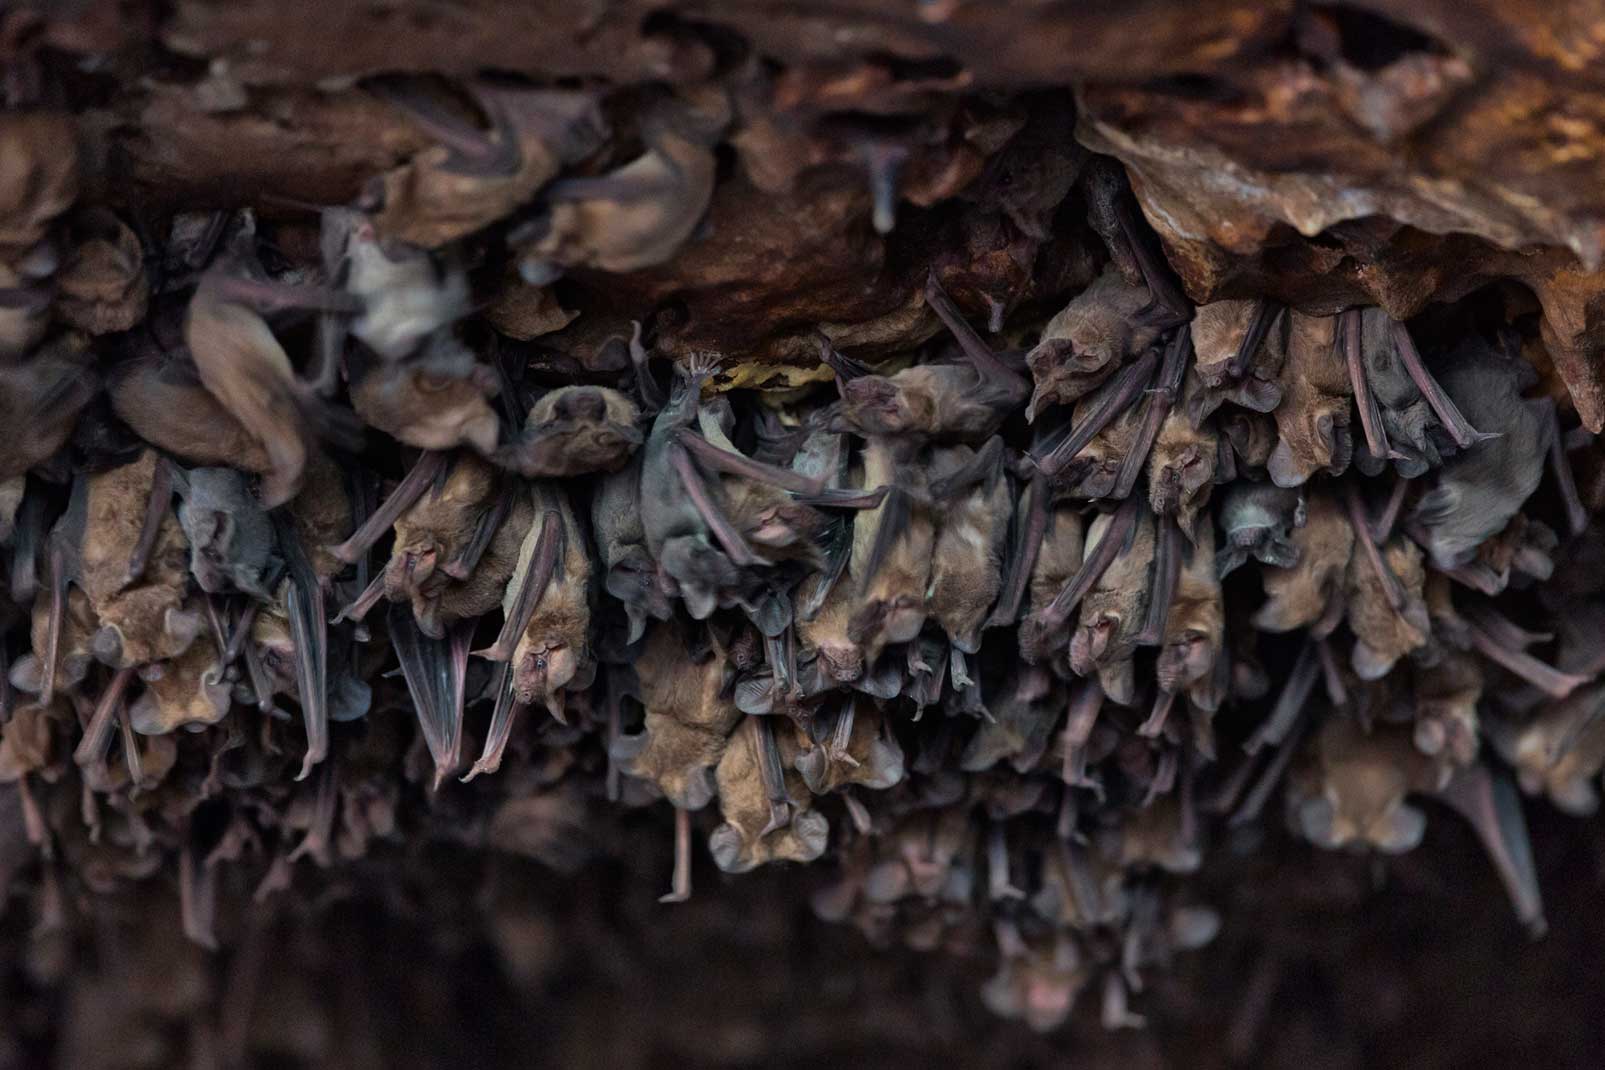 Once pups are born, the cave’s population balloons to upwards of 20 million bats. The babies cling to the rock—up to 500 pups per square foot.